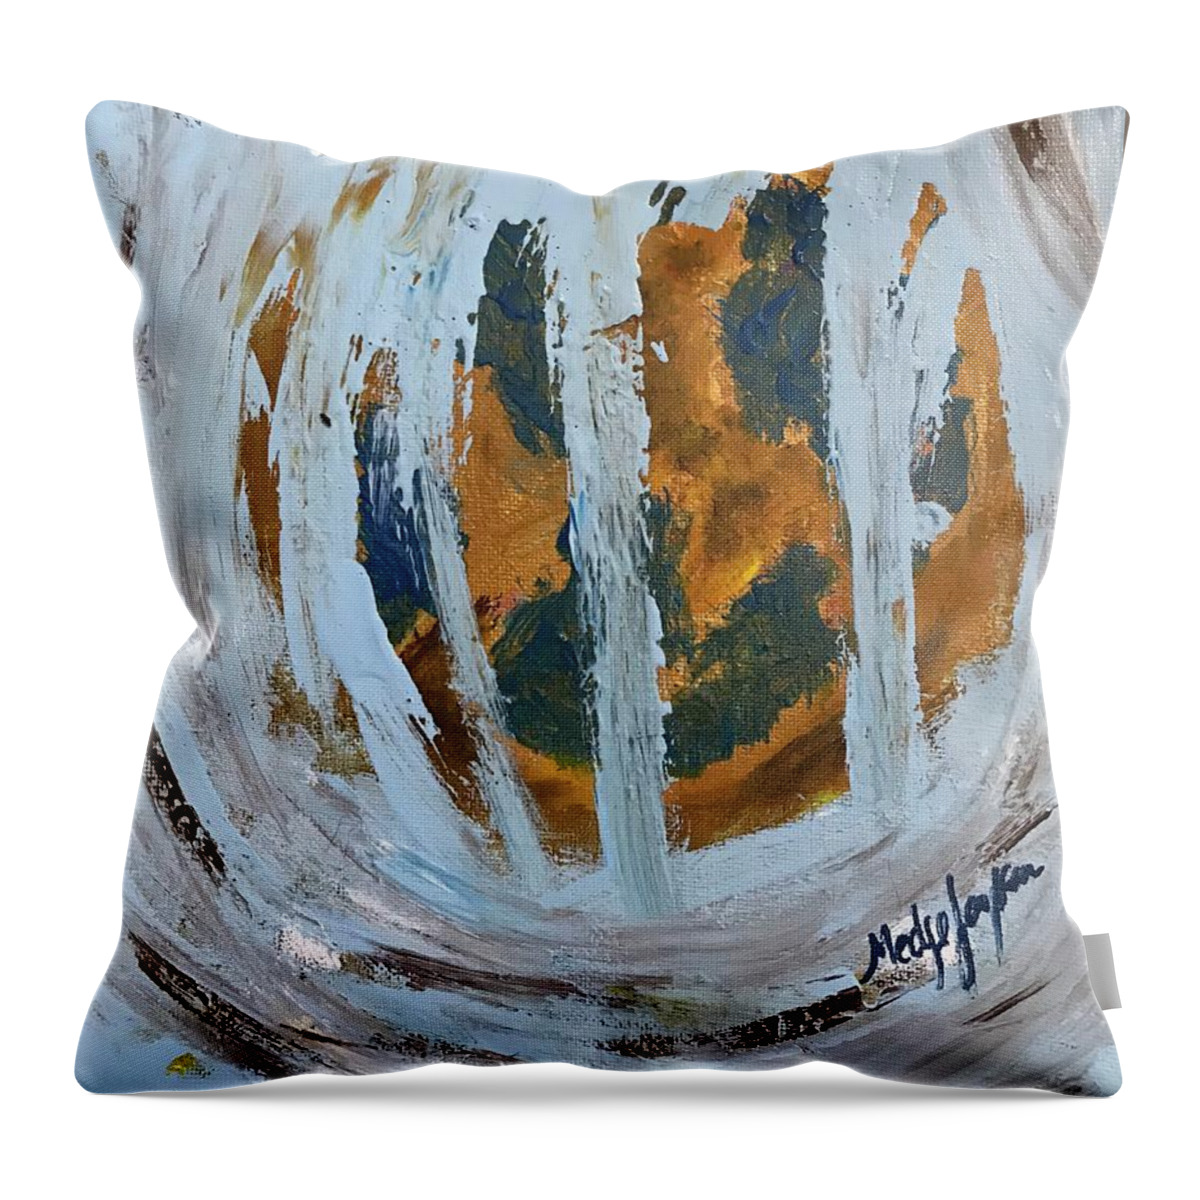 Earth Throw Pillow featuring the painting Earth Finally in Light by Medge Jaspan